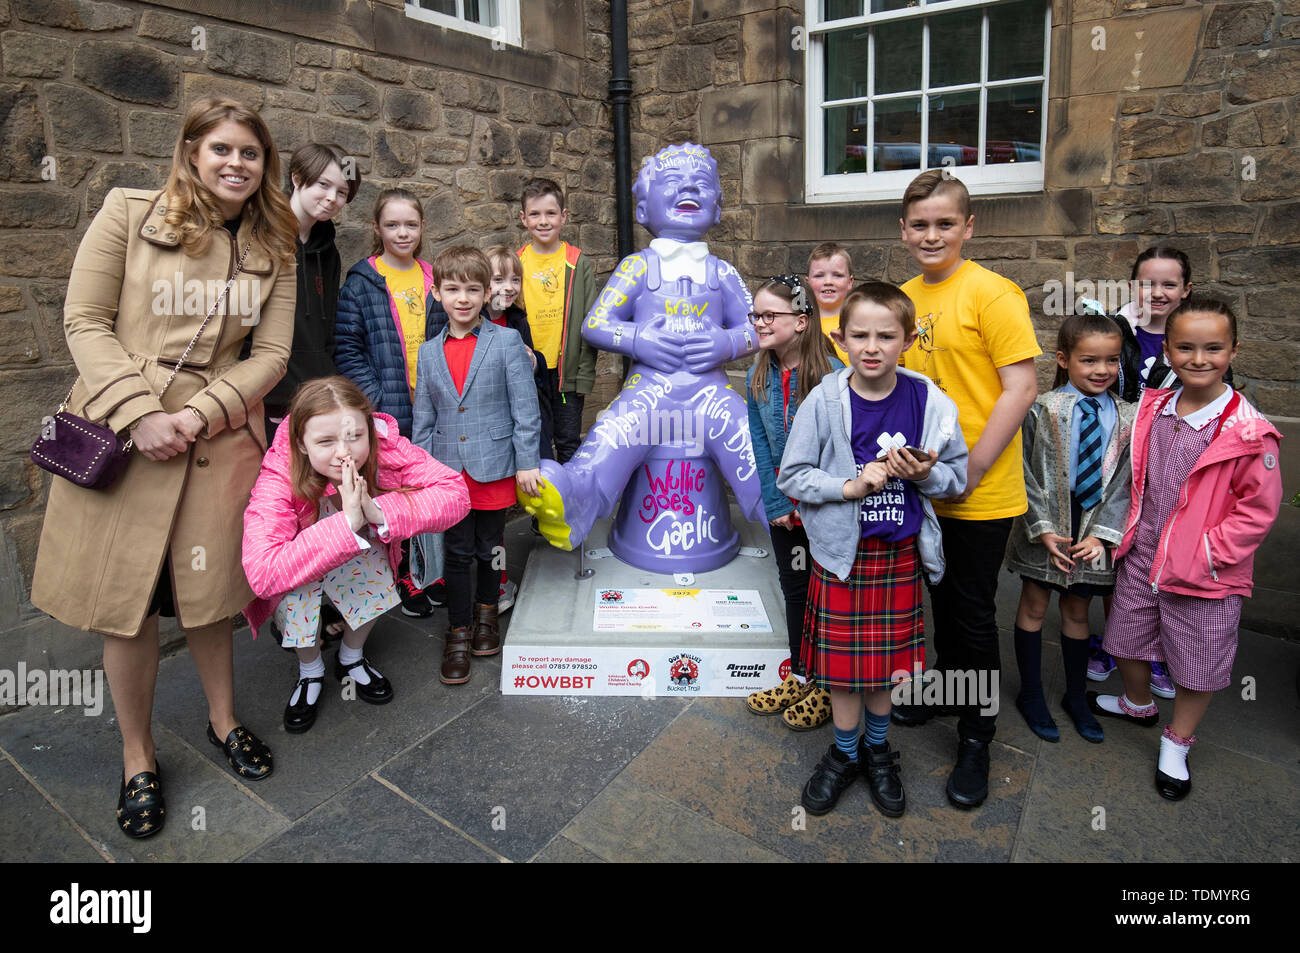 Princess Beatrice (left) joins children from Scotland's children's hospital charities as she takes part in the Oor Wullie's Big Bucket Trail to find one of several life-sized sculptures of the favourite comic book character on a public art trail in Edinburgh city centre. Stock Photo